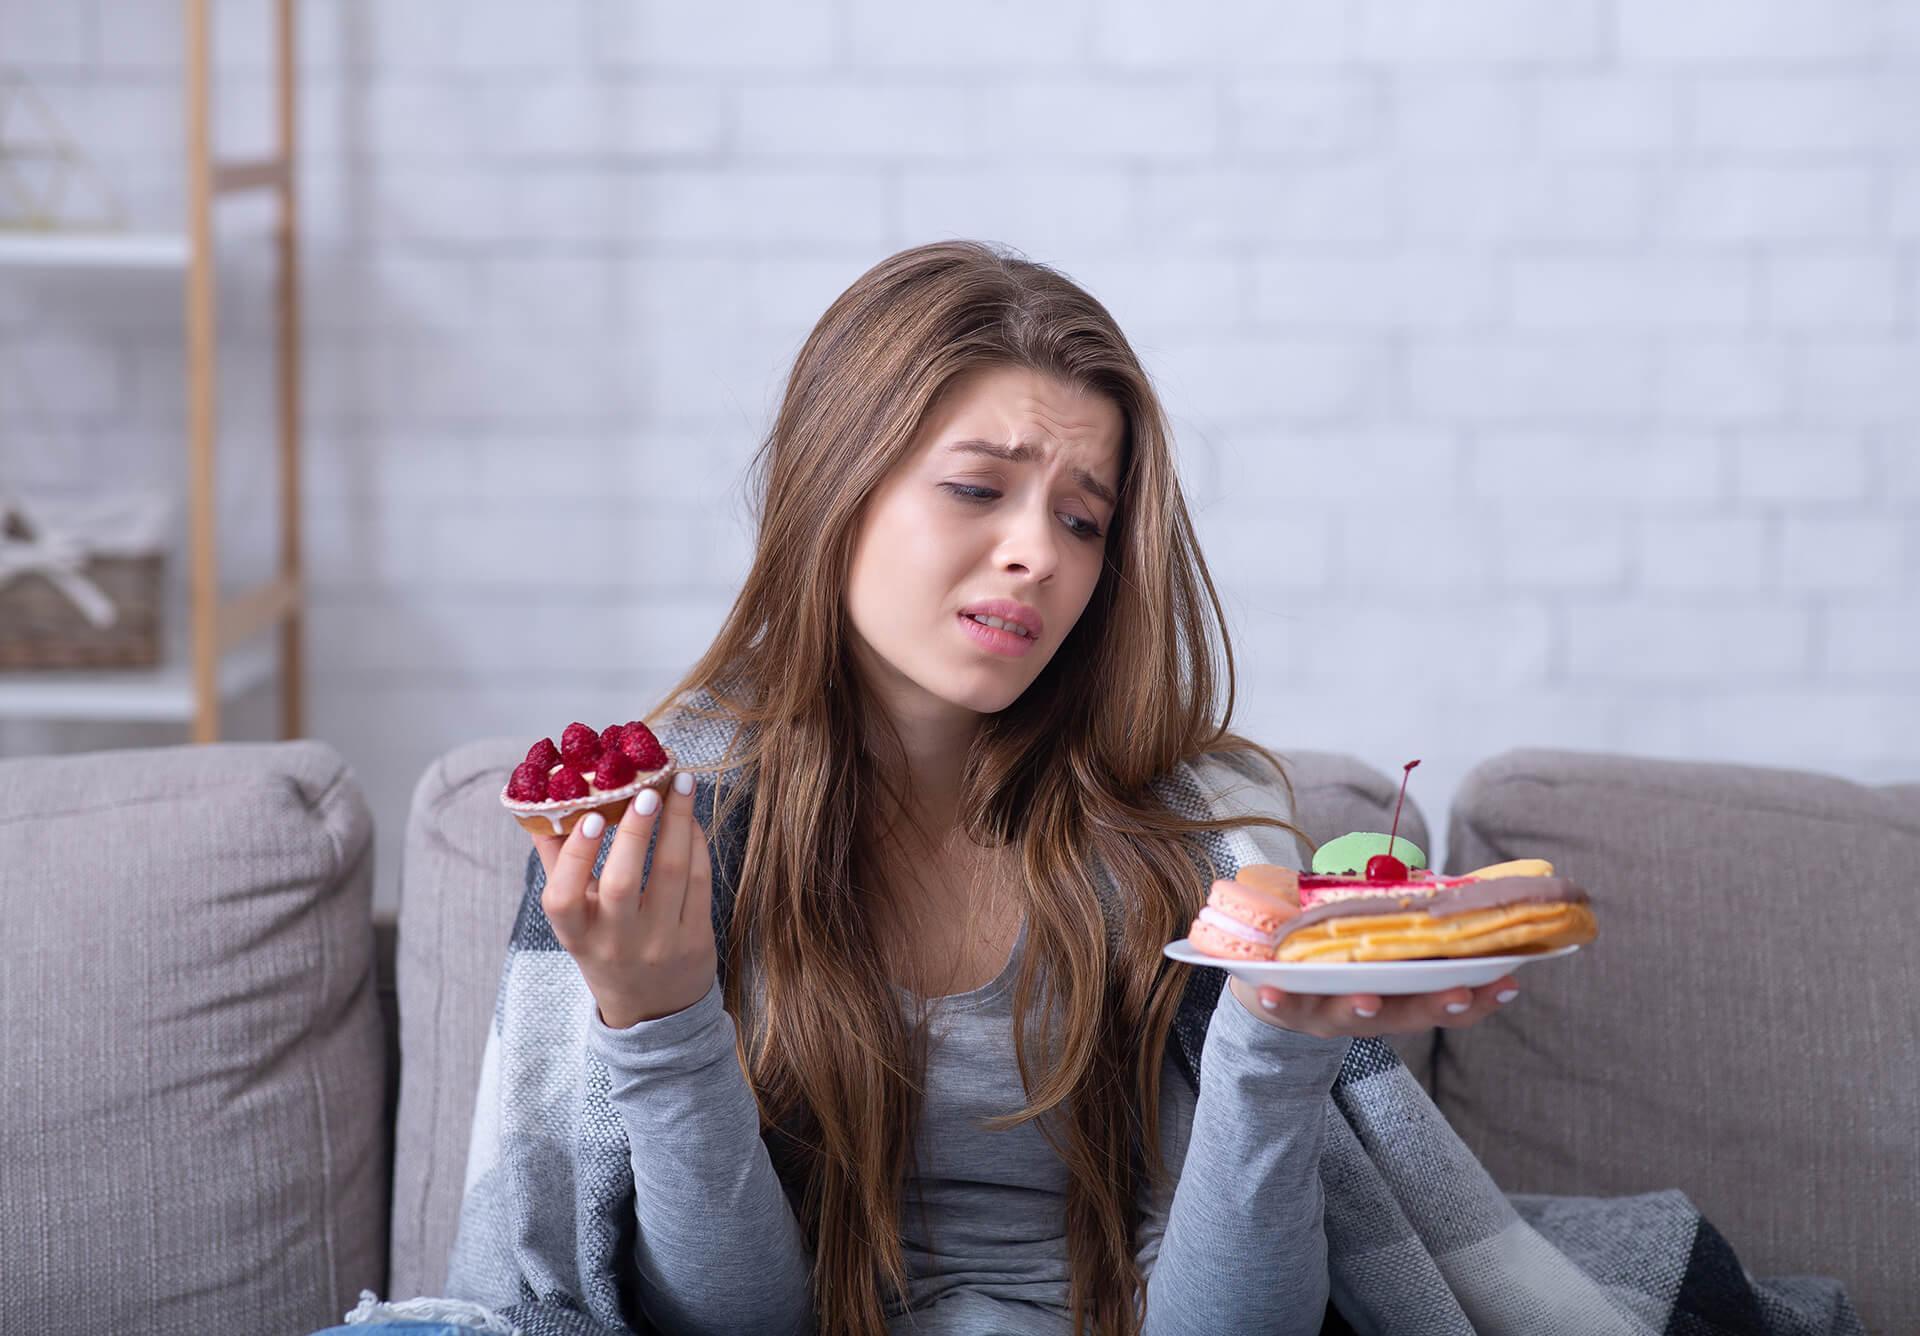 All You Need to Know About These 4 Common Eating Disorders